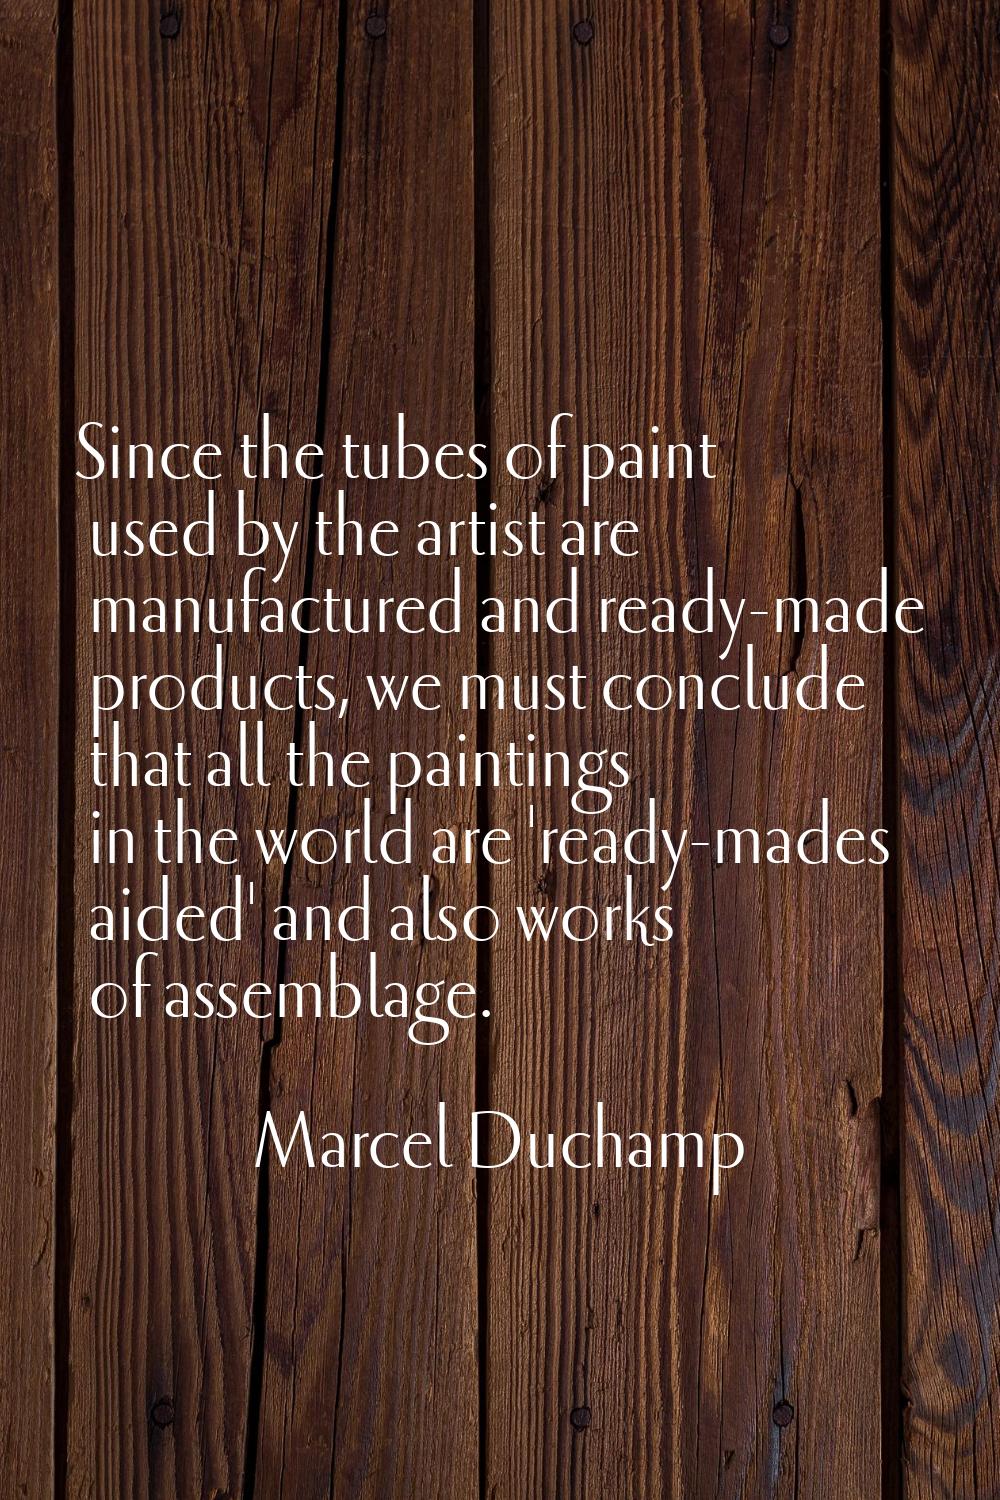 Since the tubes of paint used by the artist are manufactured and ready-made products, we must concl